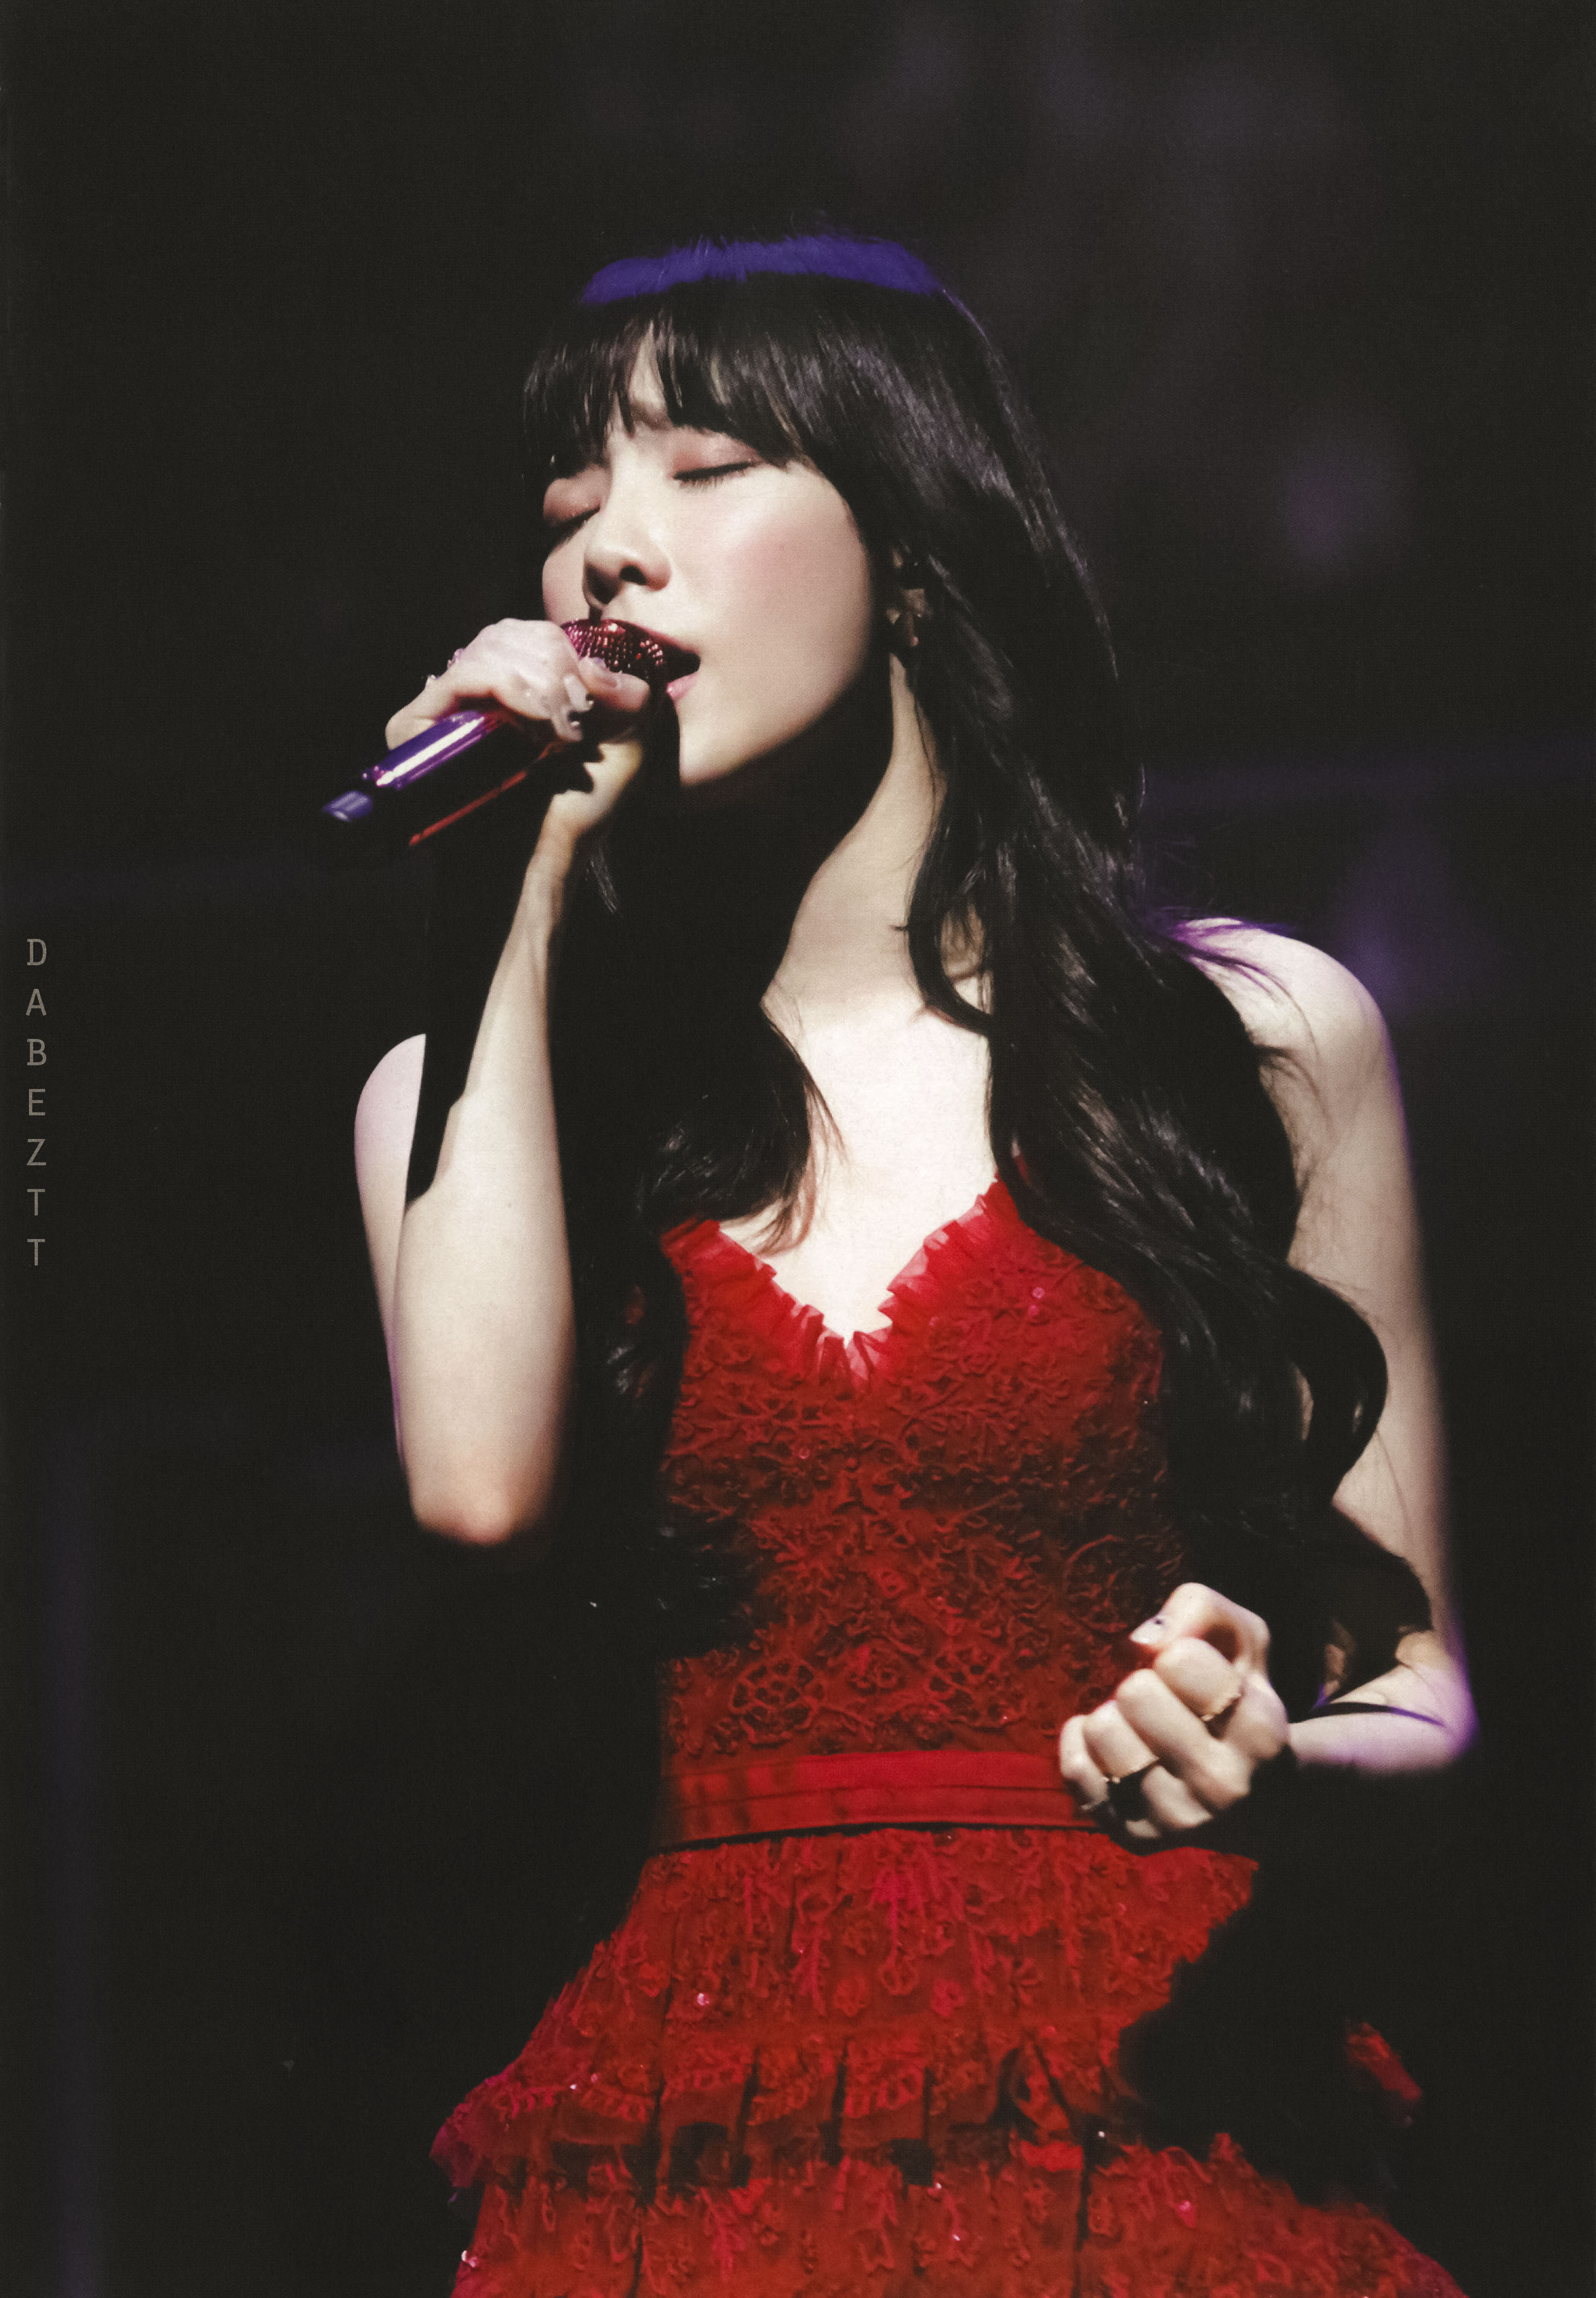 180323 TAEYEON SPECIAL LIVE “The Magic of Christmas Time” DVD 스캔 by Dabeztt (33).jpg